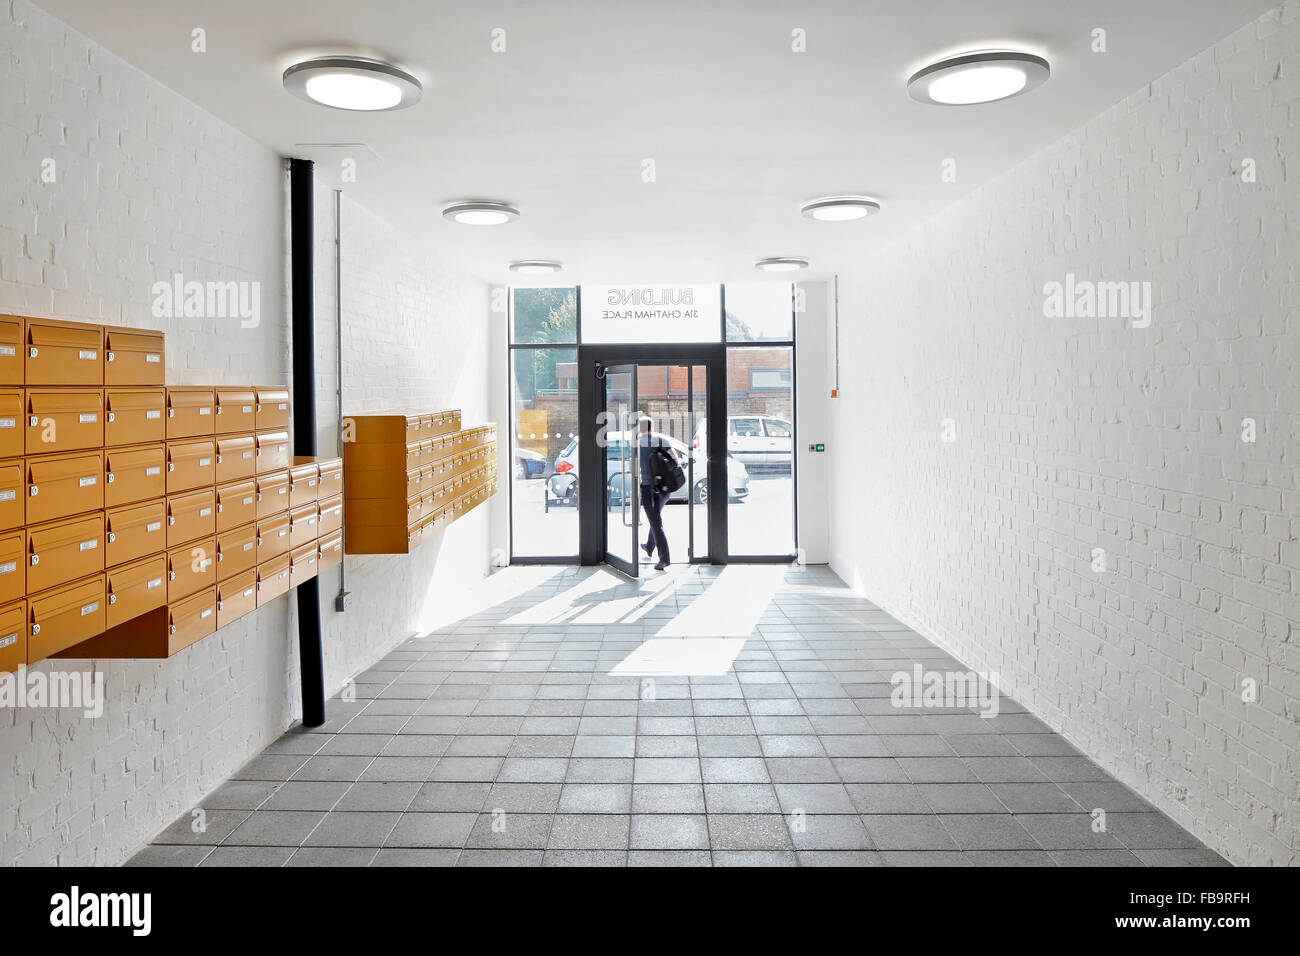 Entrance foyer with mailboxes. The Textile Building, London, United Kingdom. Architect: BGY, 2014. Stock Photo